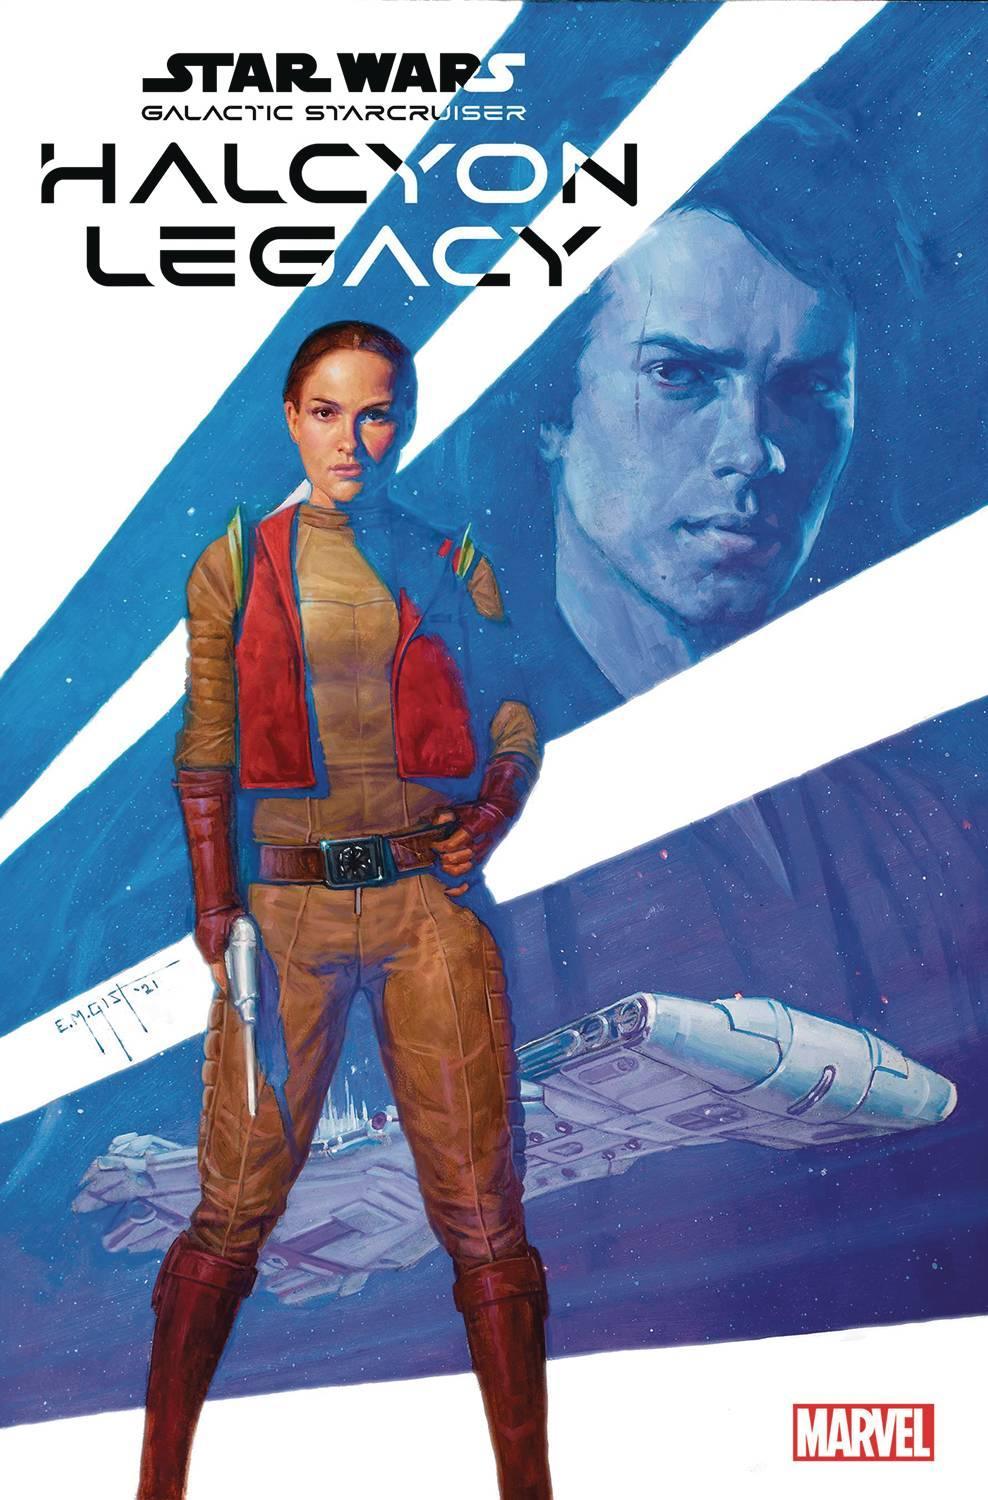 STAR WARS HALCYON LEGACY #3 (OF 5)